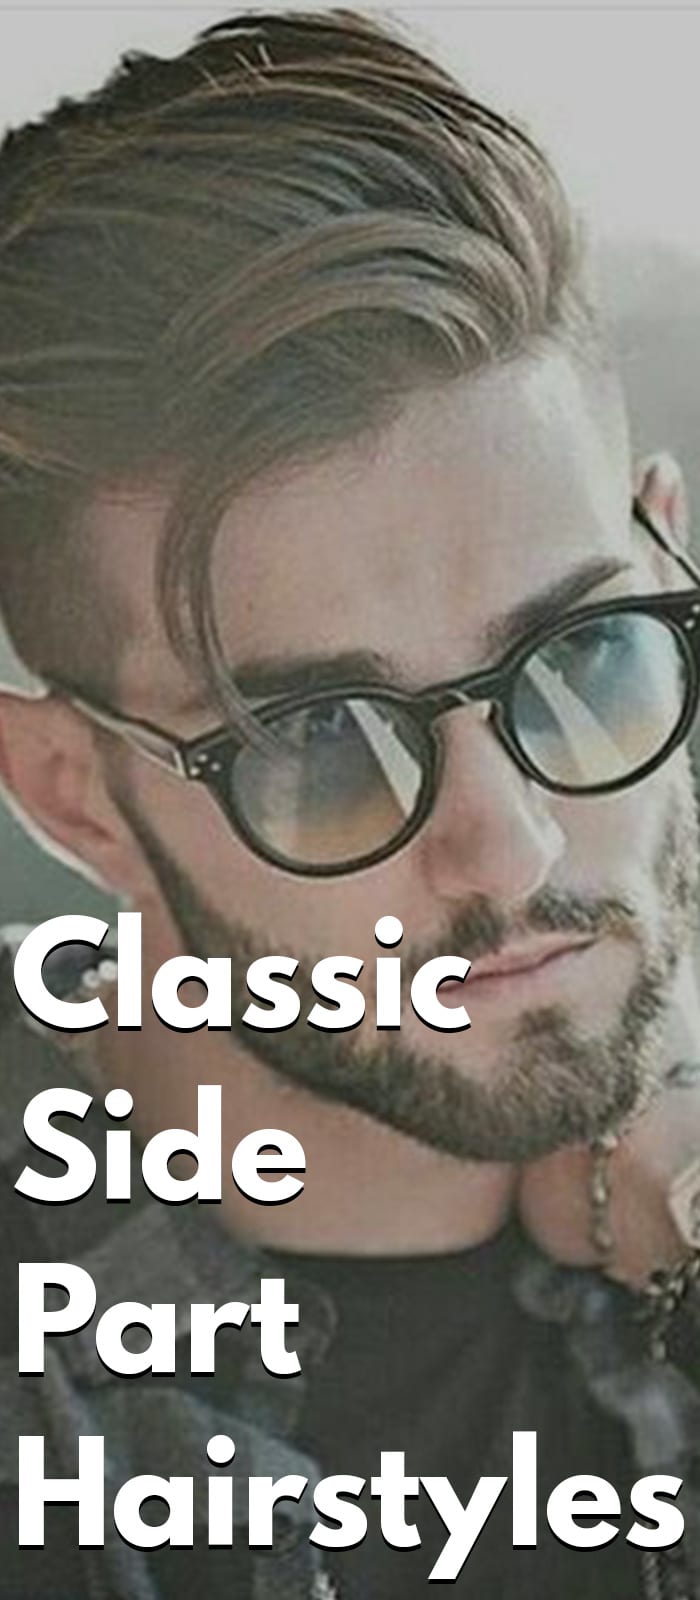 Classic Side Part Hairstyles